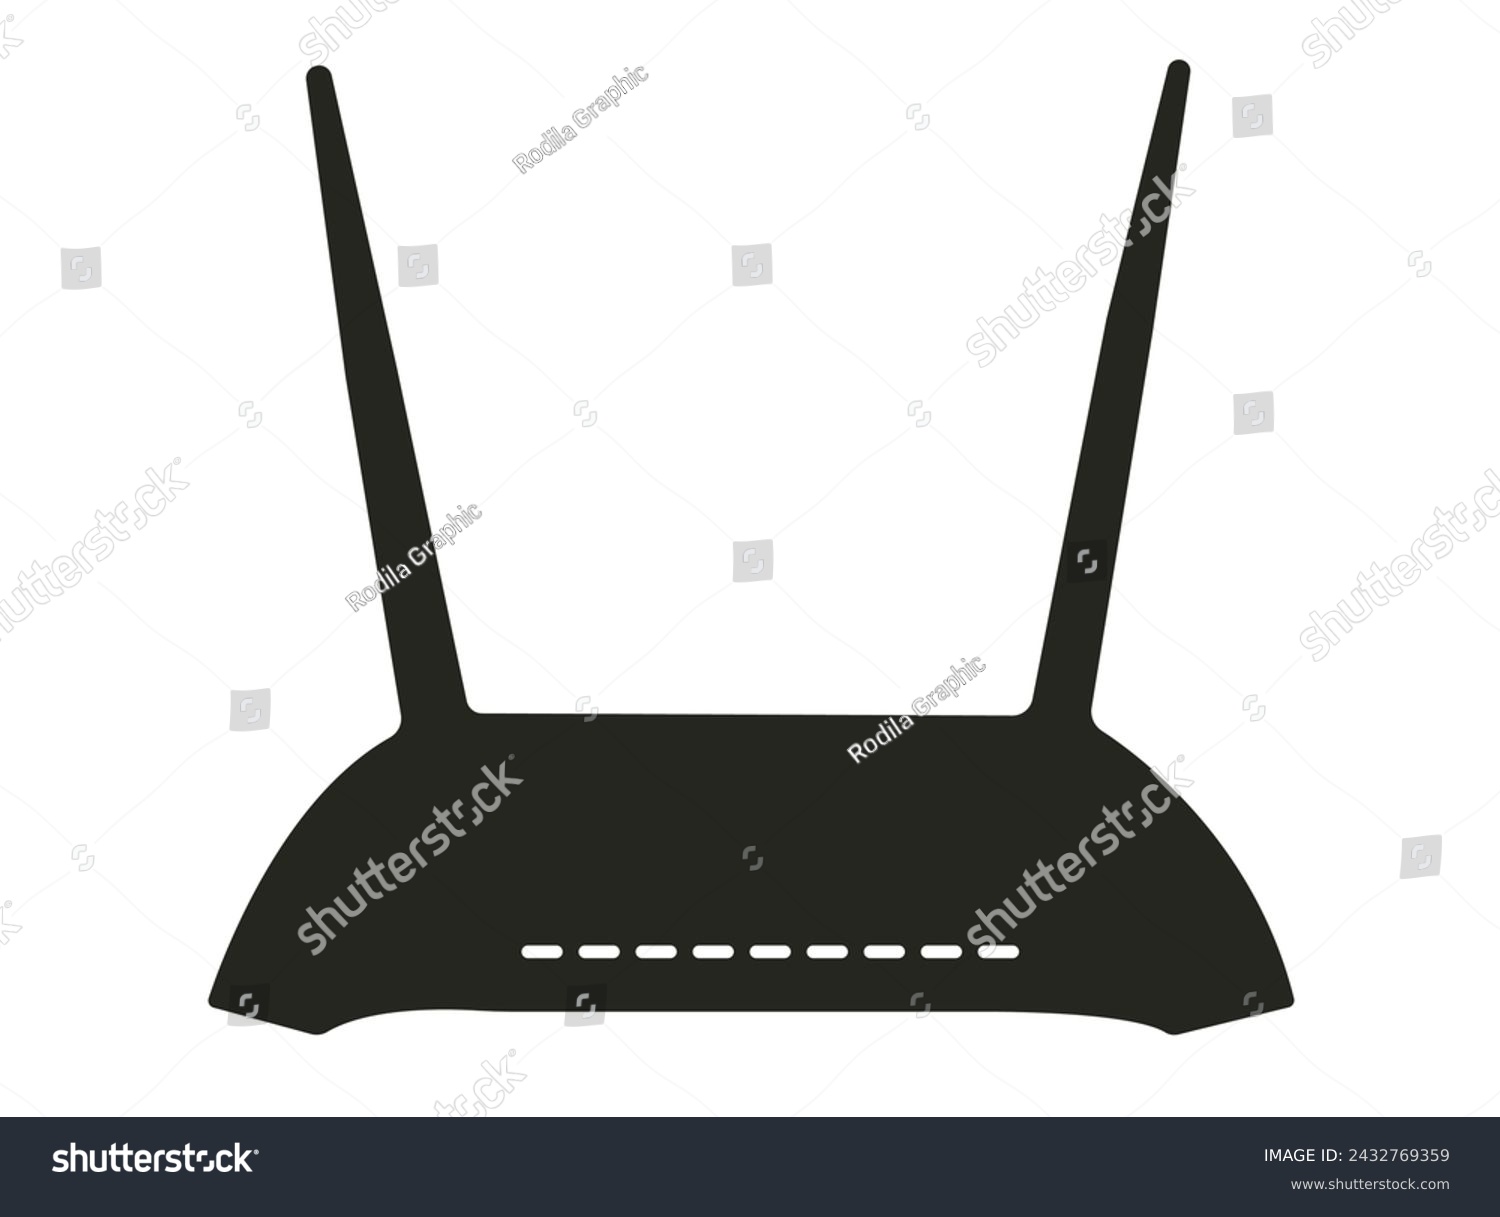 SVG of Experience seamless connectivity with our advanced Wi-Fi router. High-speed performance, wide coverage, and robust security features ensure uninterrupted internet access for all your devices. svg